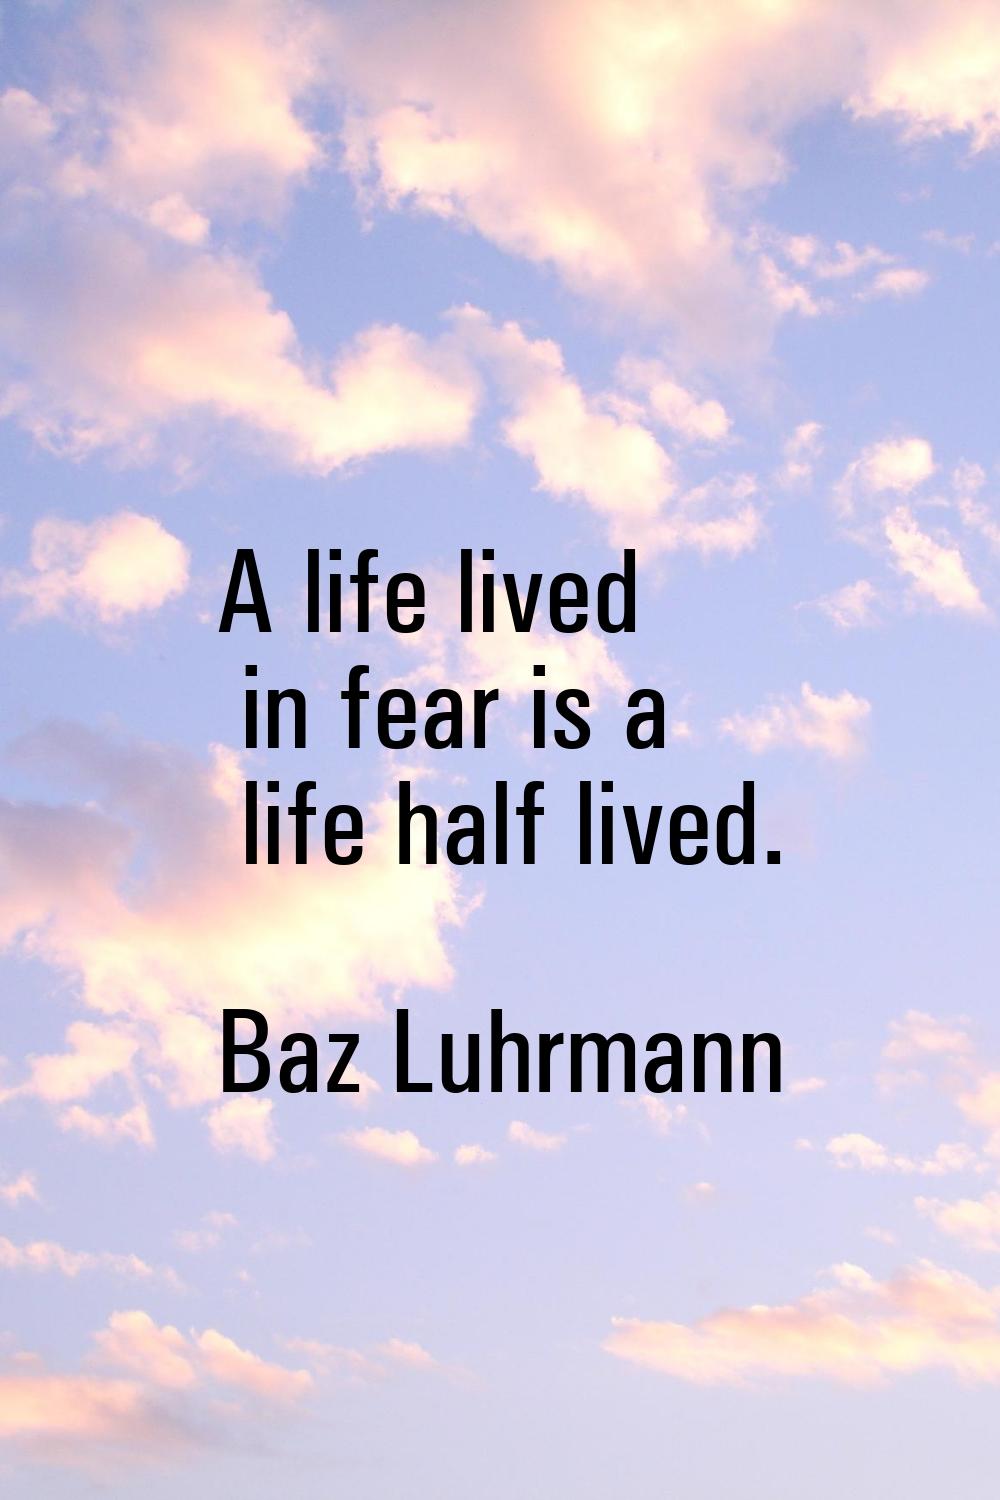 A life lived in fear is a life half lived.